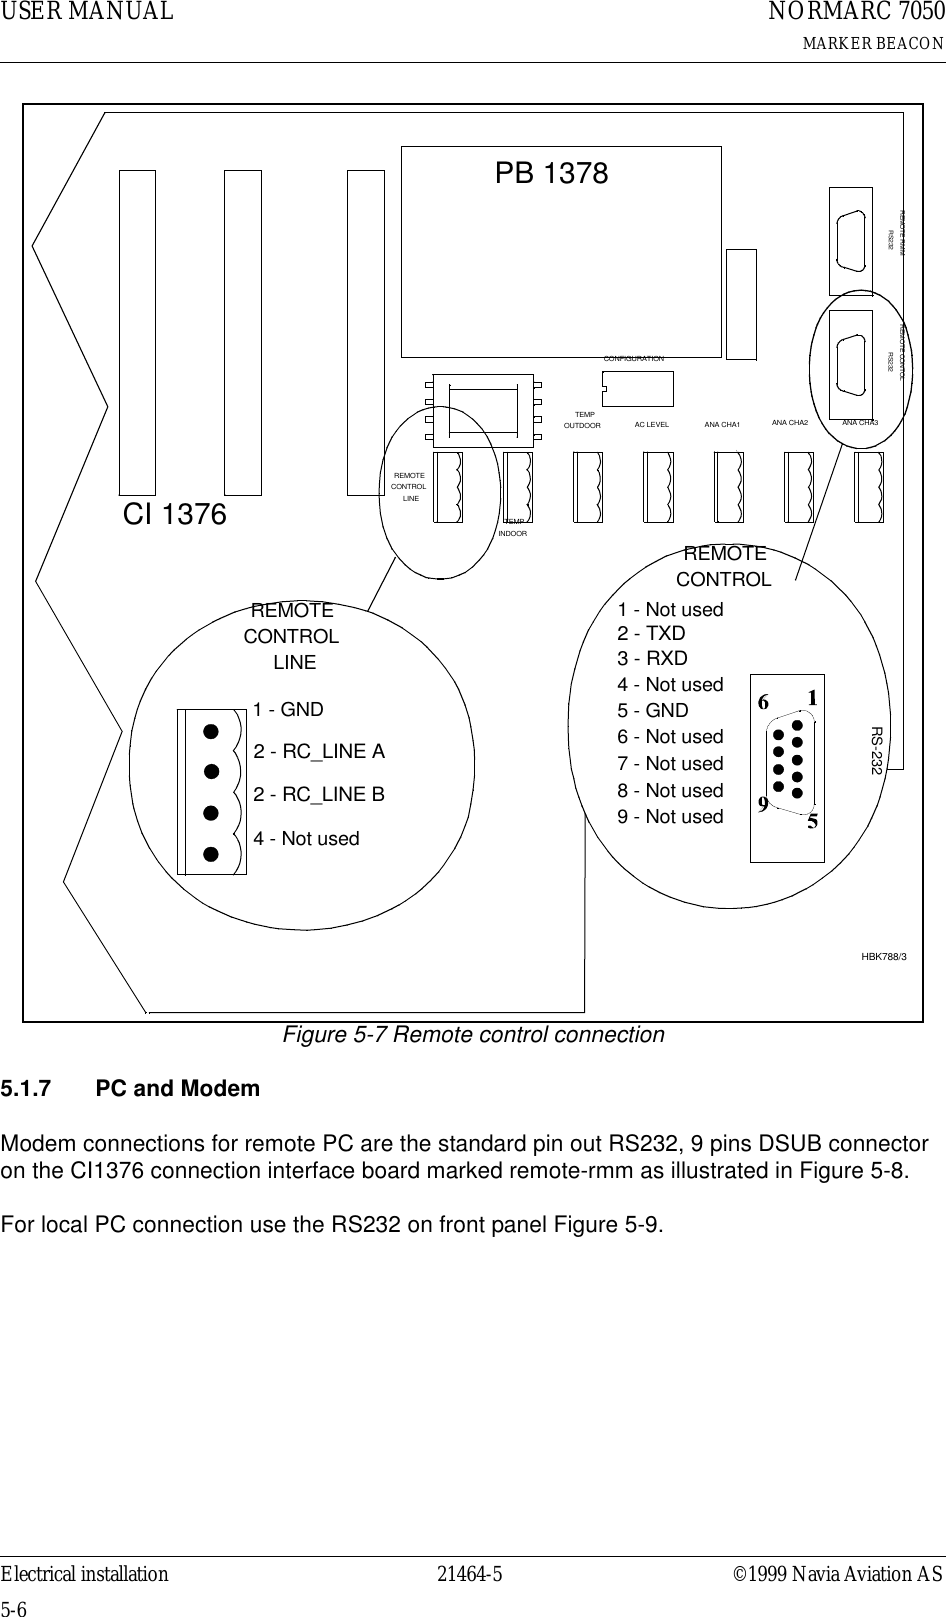 USER MANUAL5-621464-5NORMARC 7050MARKER BEACONElectrical installation ©1999 Navia Aviation AS Figure 5-7 Remote control connection5.1.7  PC and ModemModem connections for remote PC are the standard pin out RS232, 9 pins DSUB connector on the CI1376 connection interface board marked remote-rmm as illustrated in Figure 5-8.For local PC connection use the RS232 on front panel Figure 5-9.CI 1376PB 1378REMOTECONTROLLINETEMPOUTDOORTEMPINDOORAC LEVEL ANA CHA1 ANA CHA2 ANA CHA3REMOTE RMMRS232REMOTE CONTOLRS232CONFIGURATION1 - GND2 - RC_LINE B4 - Not used1 - Not used3 - RXD2 - TXD4 - Not used5 - GND6 - Not used7 - Not used8 - Not used9 - Not usedREMOTECONTROLREMOTECONTROLLINERS-232HBK788/32 - RC_LINE A